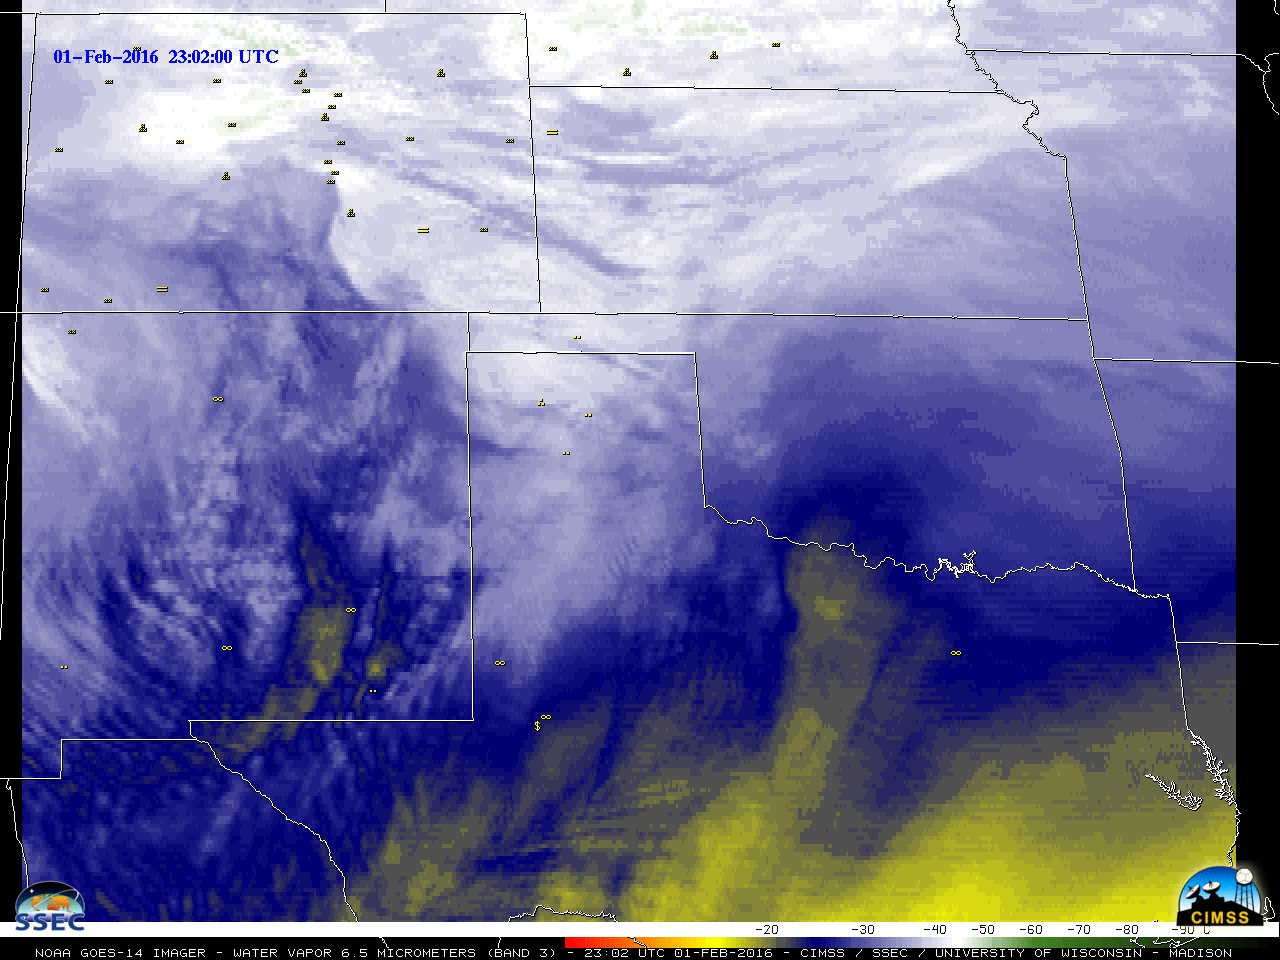 GOES-14 Water Vapor (6.5 µm) images, with surface weather symbols [click to play MP4 animation]